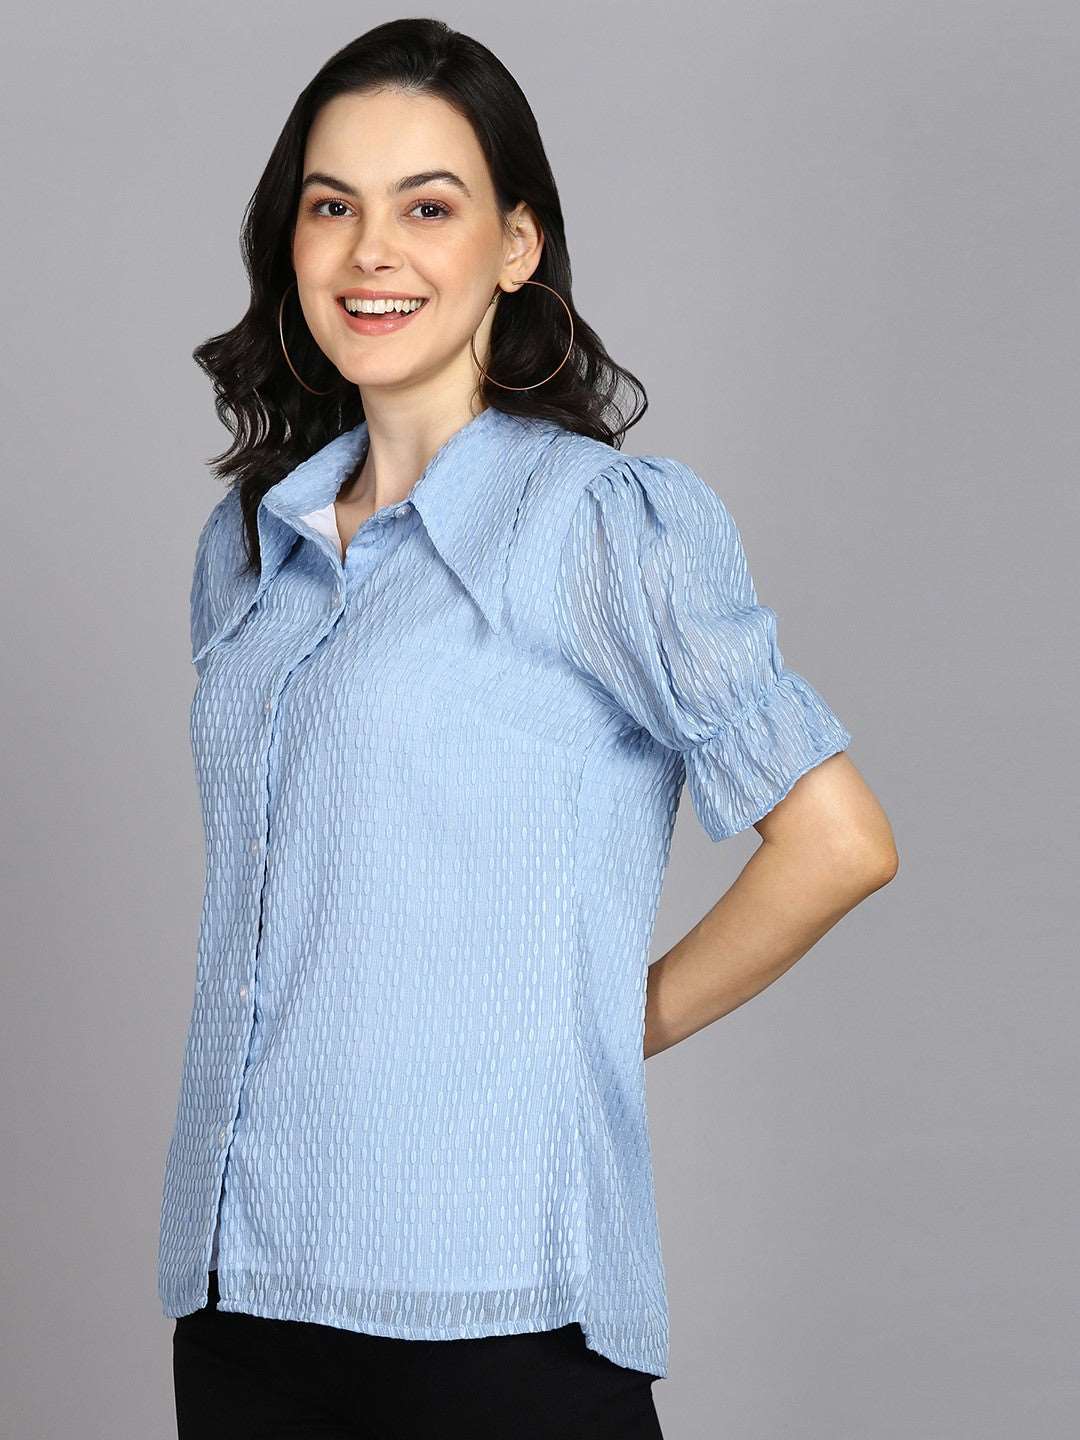 The model in the image is wearing Casual Regular Sleeves Self Design Women Sky Blue Top from Alice Milan. Crafted with the finest materials and impeccable attention to detail, the Western Wear Top looks premium, trendy, luxurious and offers unparalleled comfort. It’s a perfect clothing option for loungewear, resort wear, party wear or for an airport look. The woman in the image looks happy, and confident with her style statement putting a happy smile on her face.